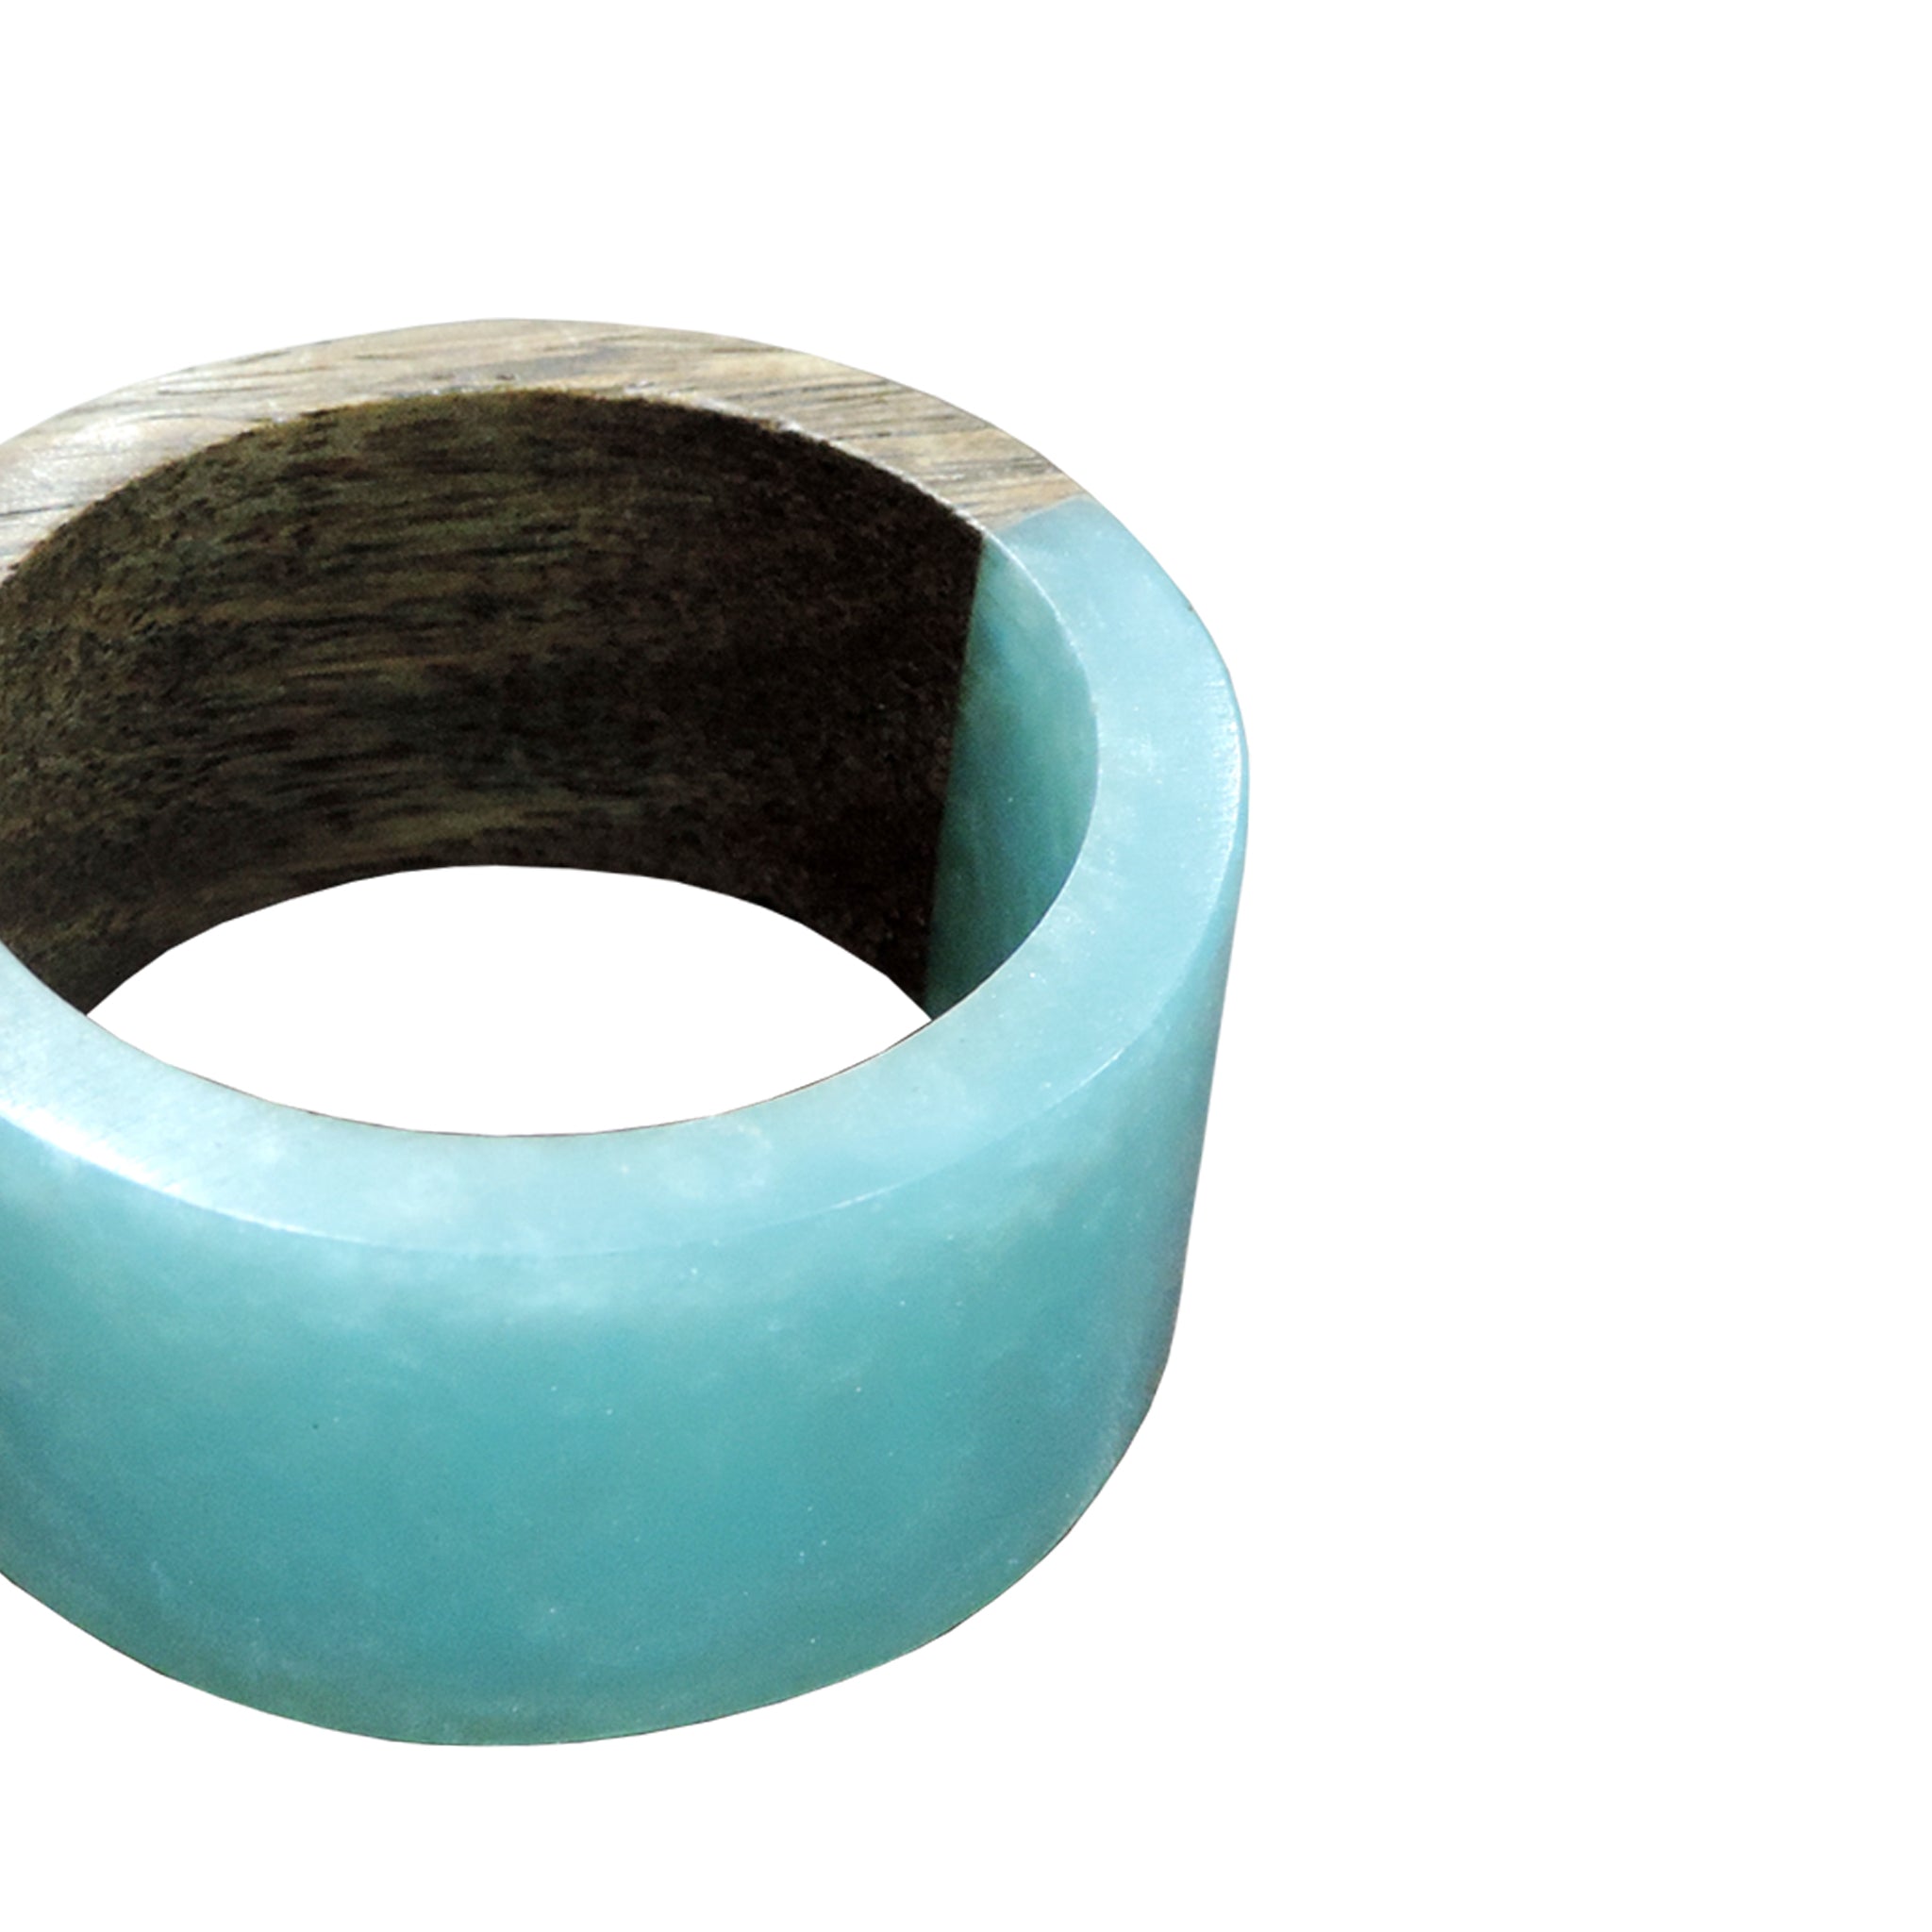 Linen by Trunkin'/ Wood with resin Round Napkin Ring Set of 4 / Aqua/2"*2"